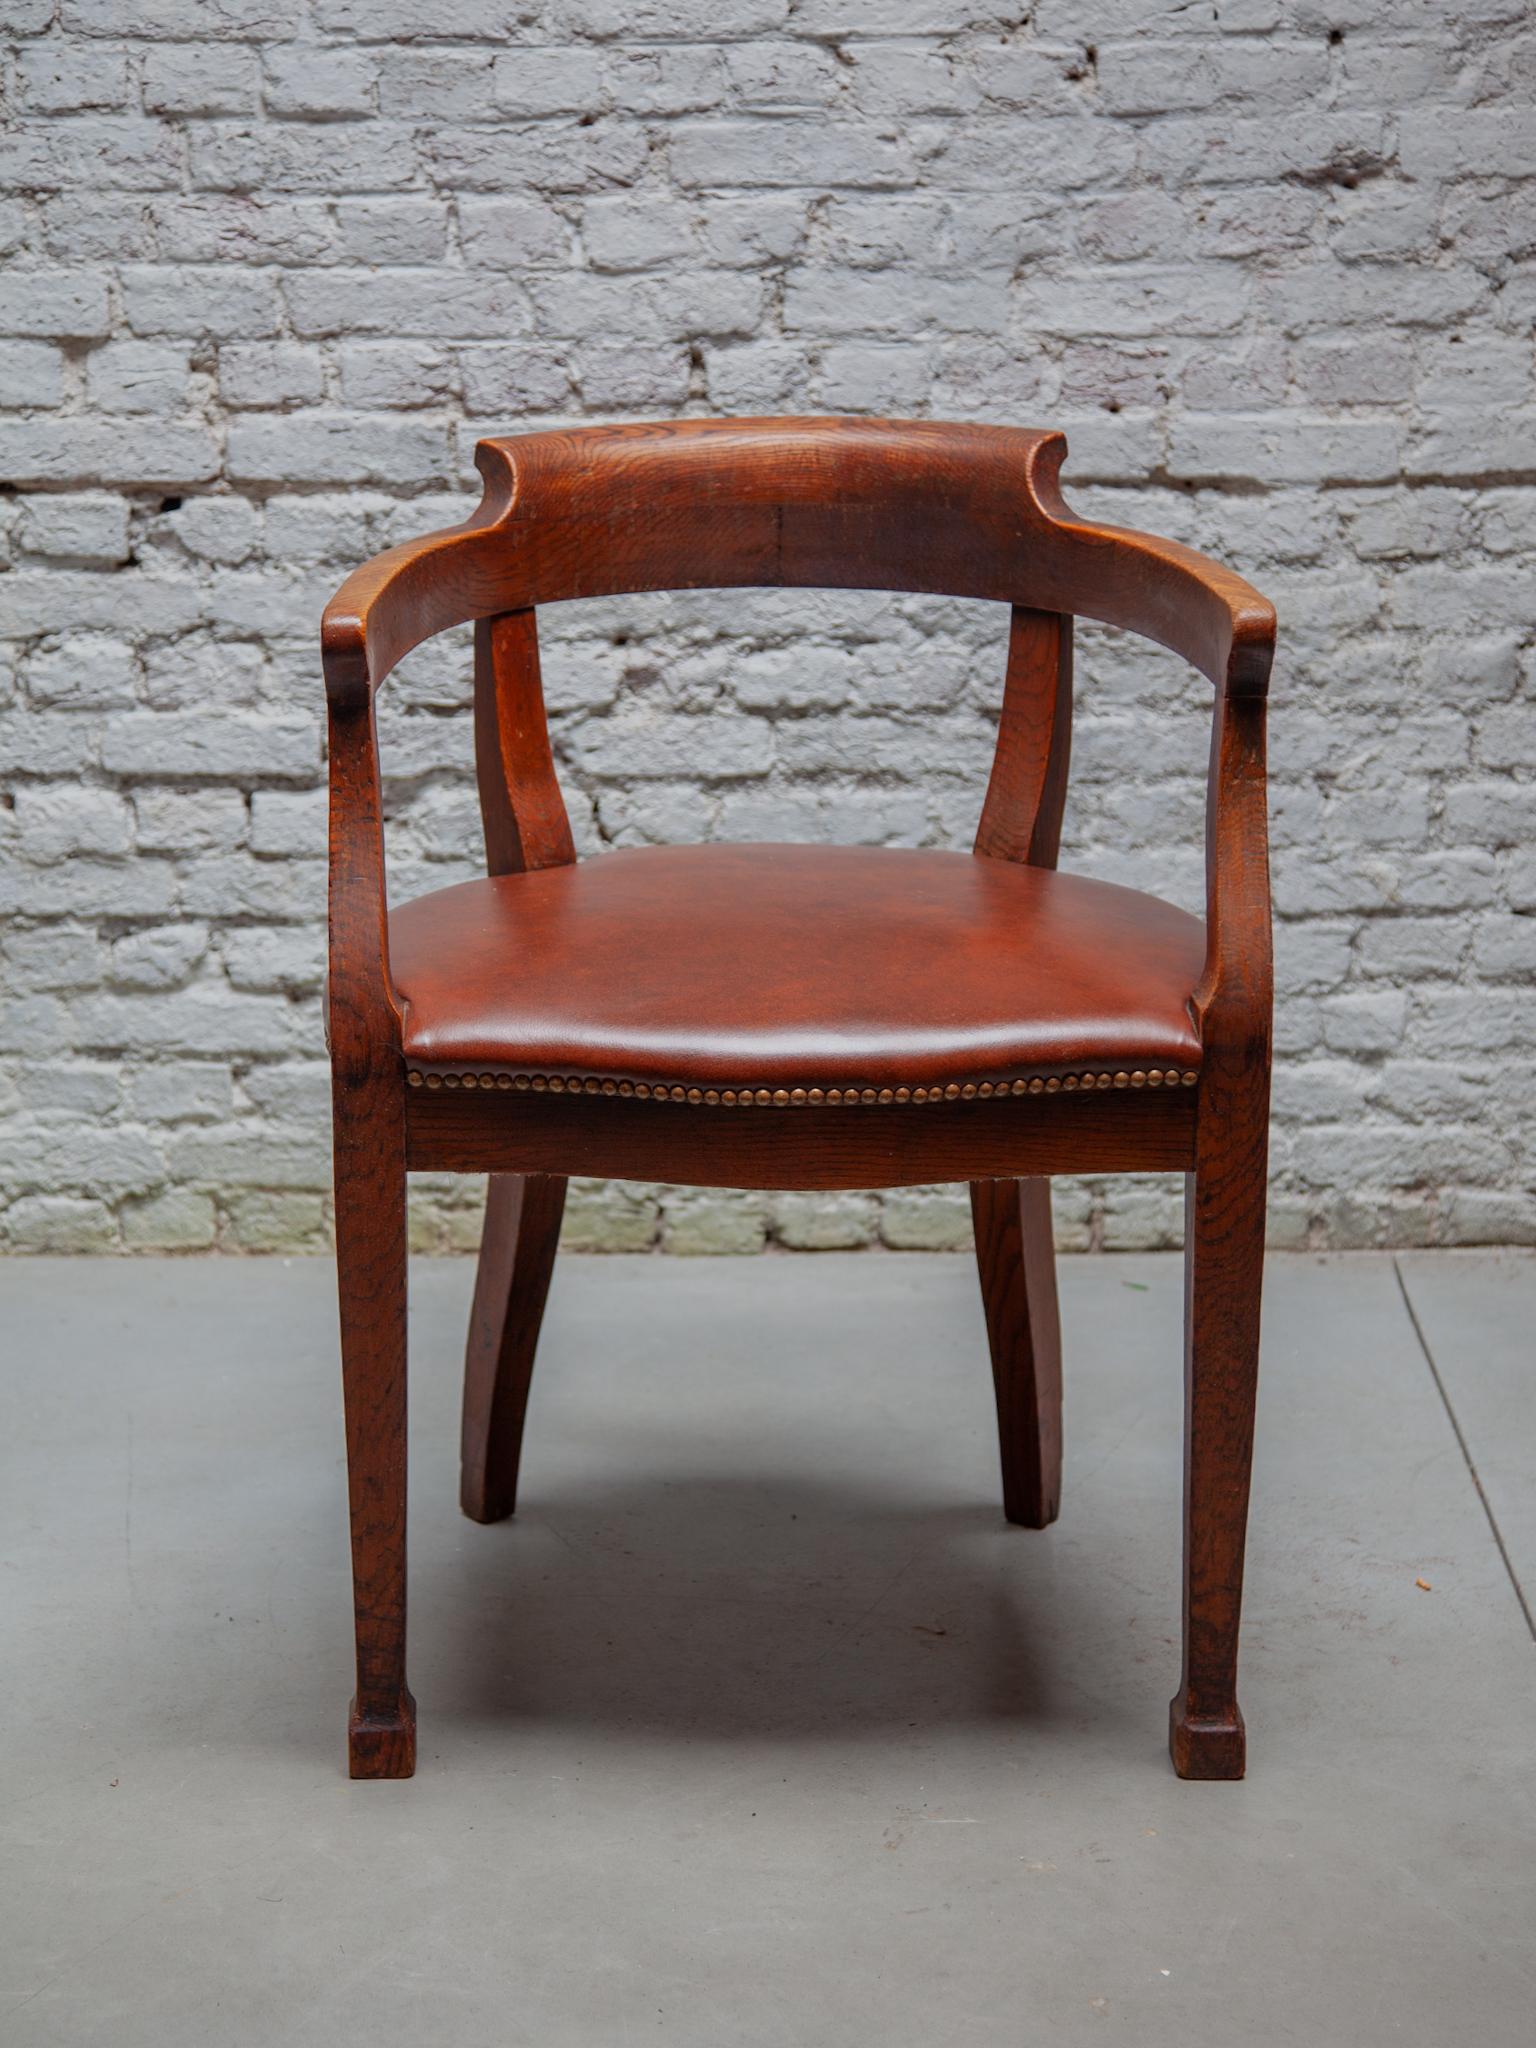 French Art Deco oak desk or side chair. Handsome French Art Deco oak desk chair. This stunning desk chair or office chair has a distressed leather seat and would look great with a French Art Deco desk in your office or interior.